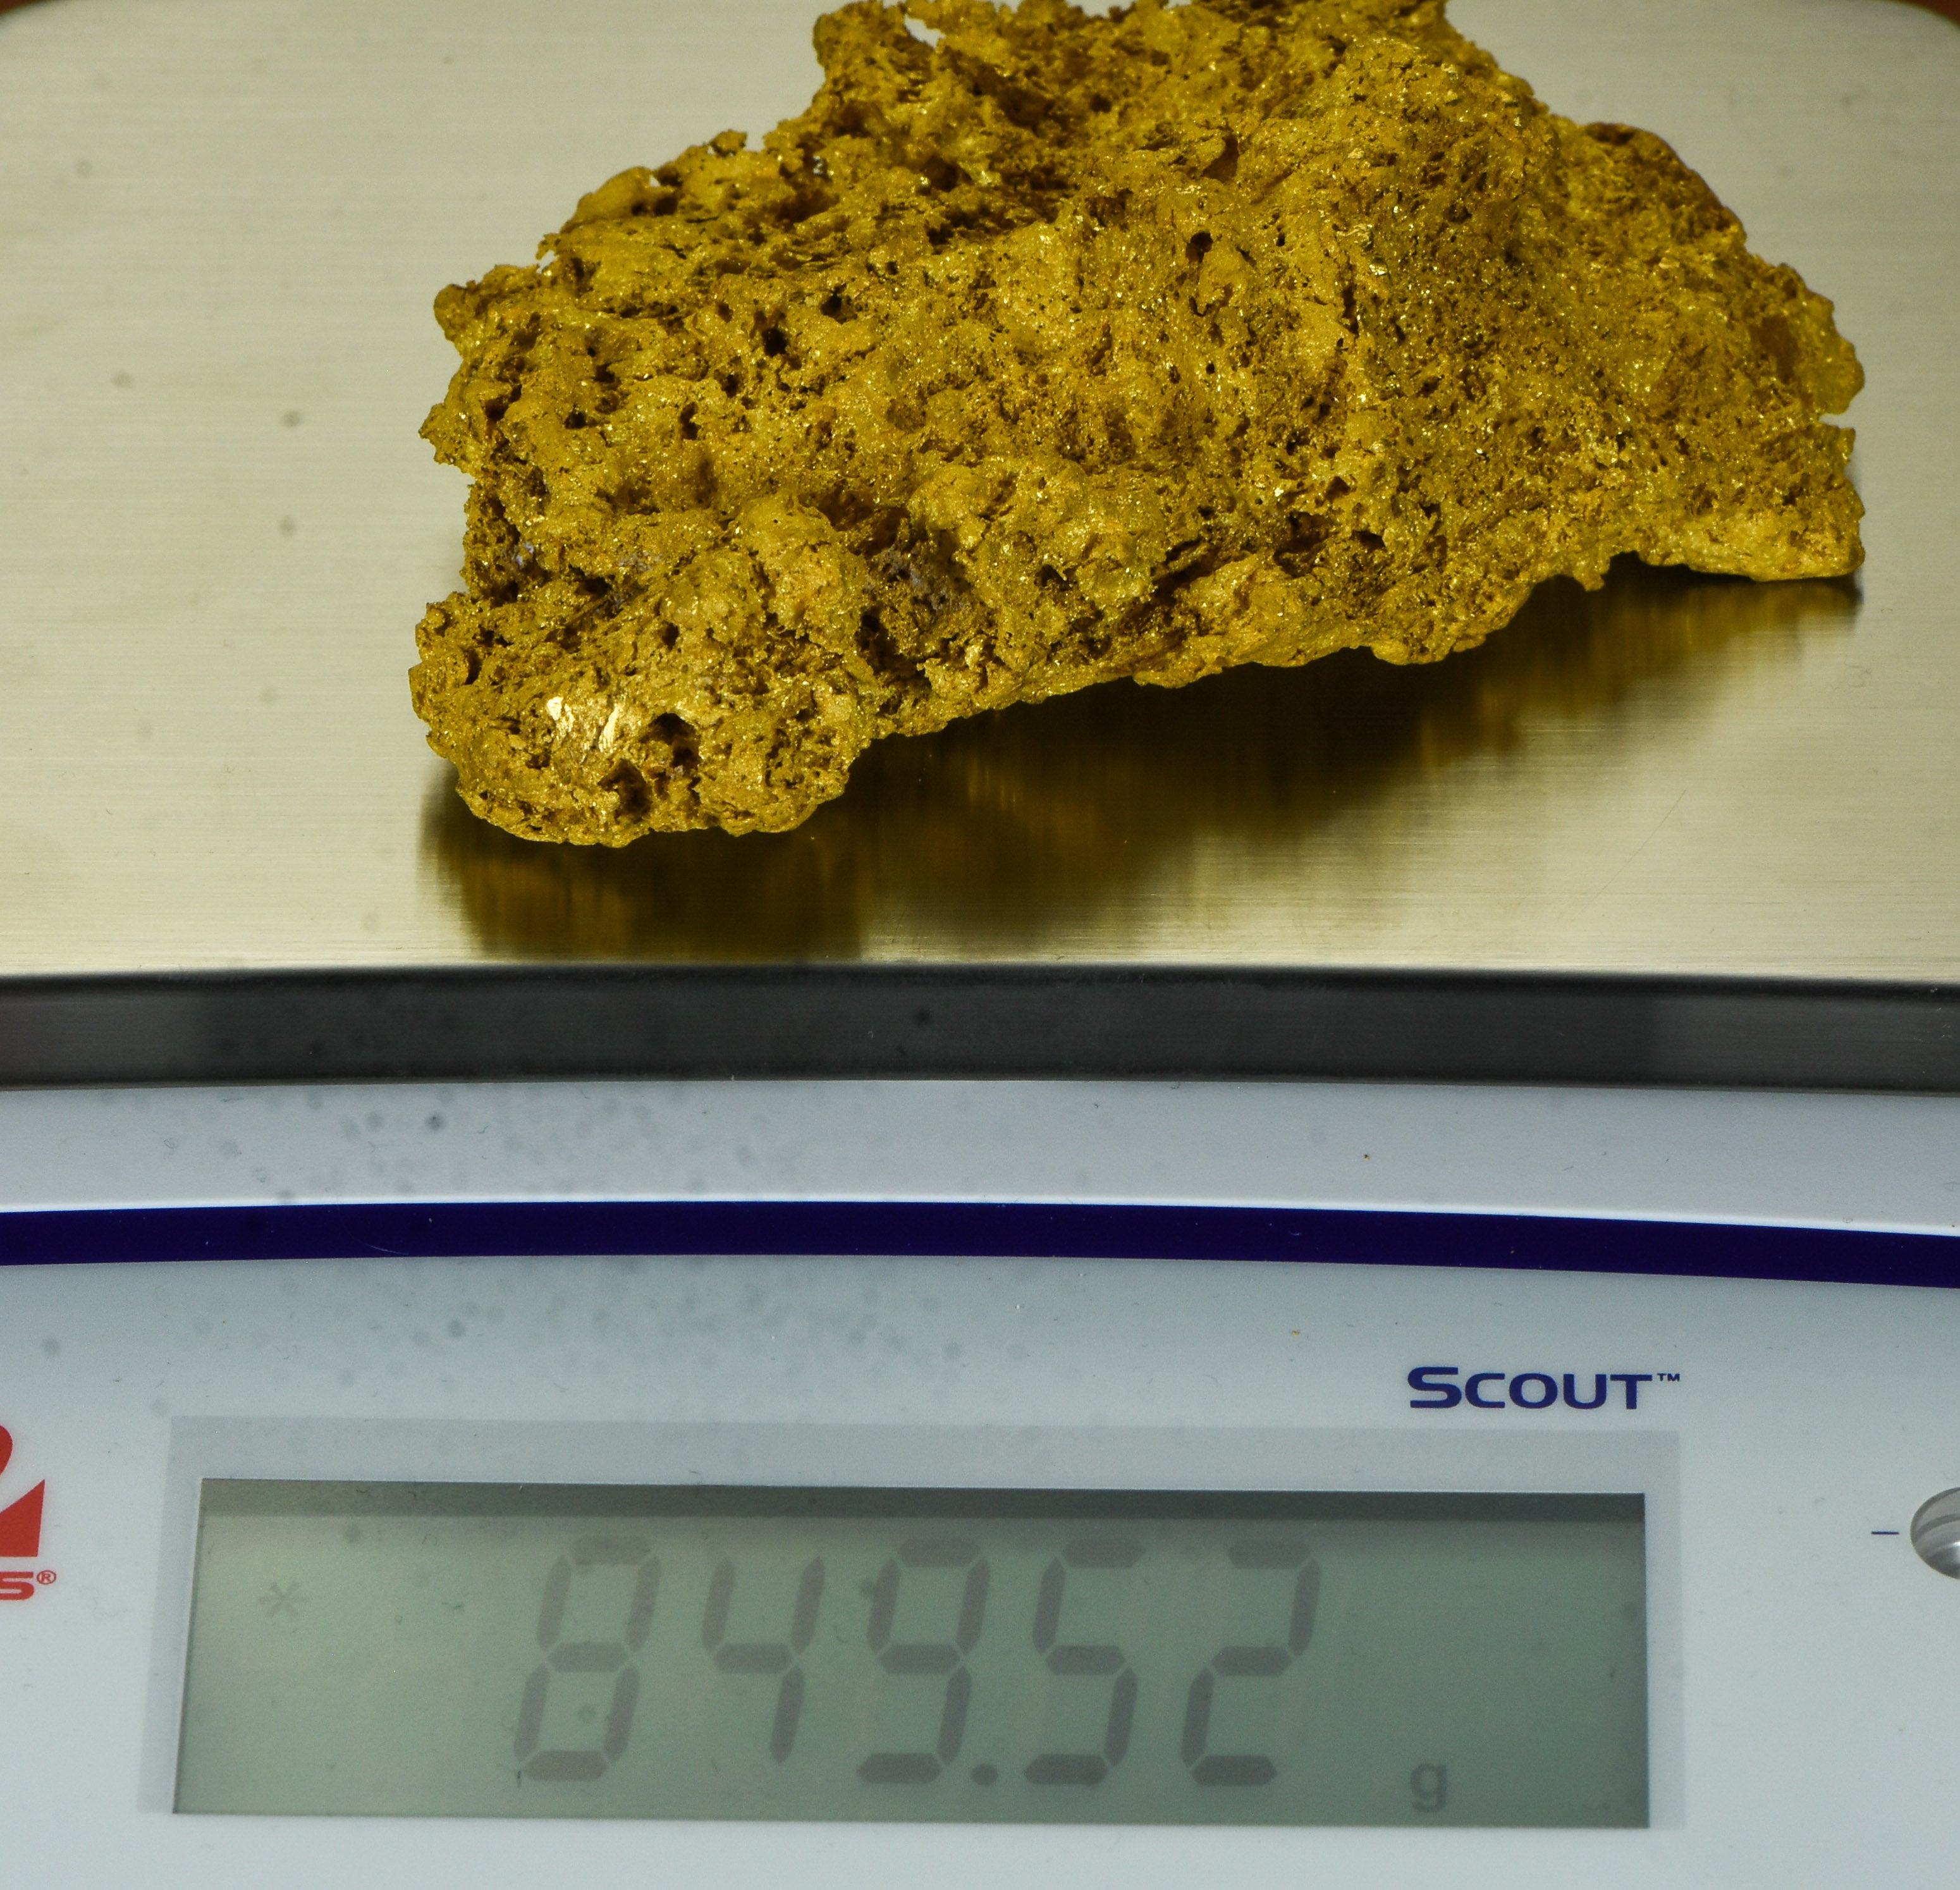 Large Natural Gold Nugget Australian 849.52 Grams 27.31 Troy Ounces Very Rare